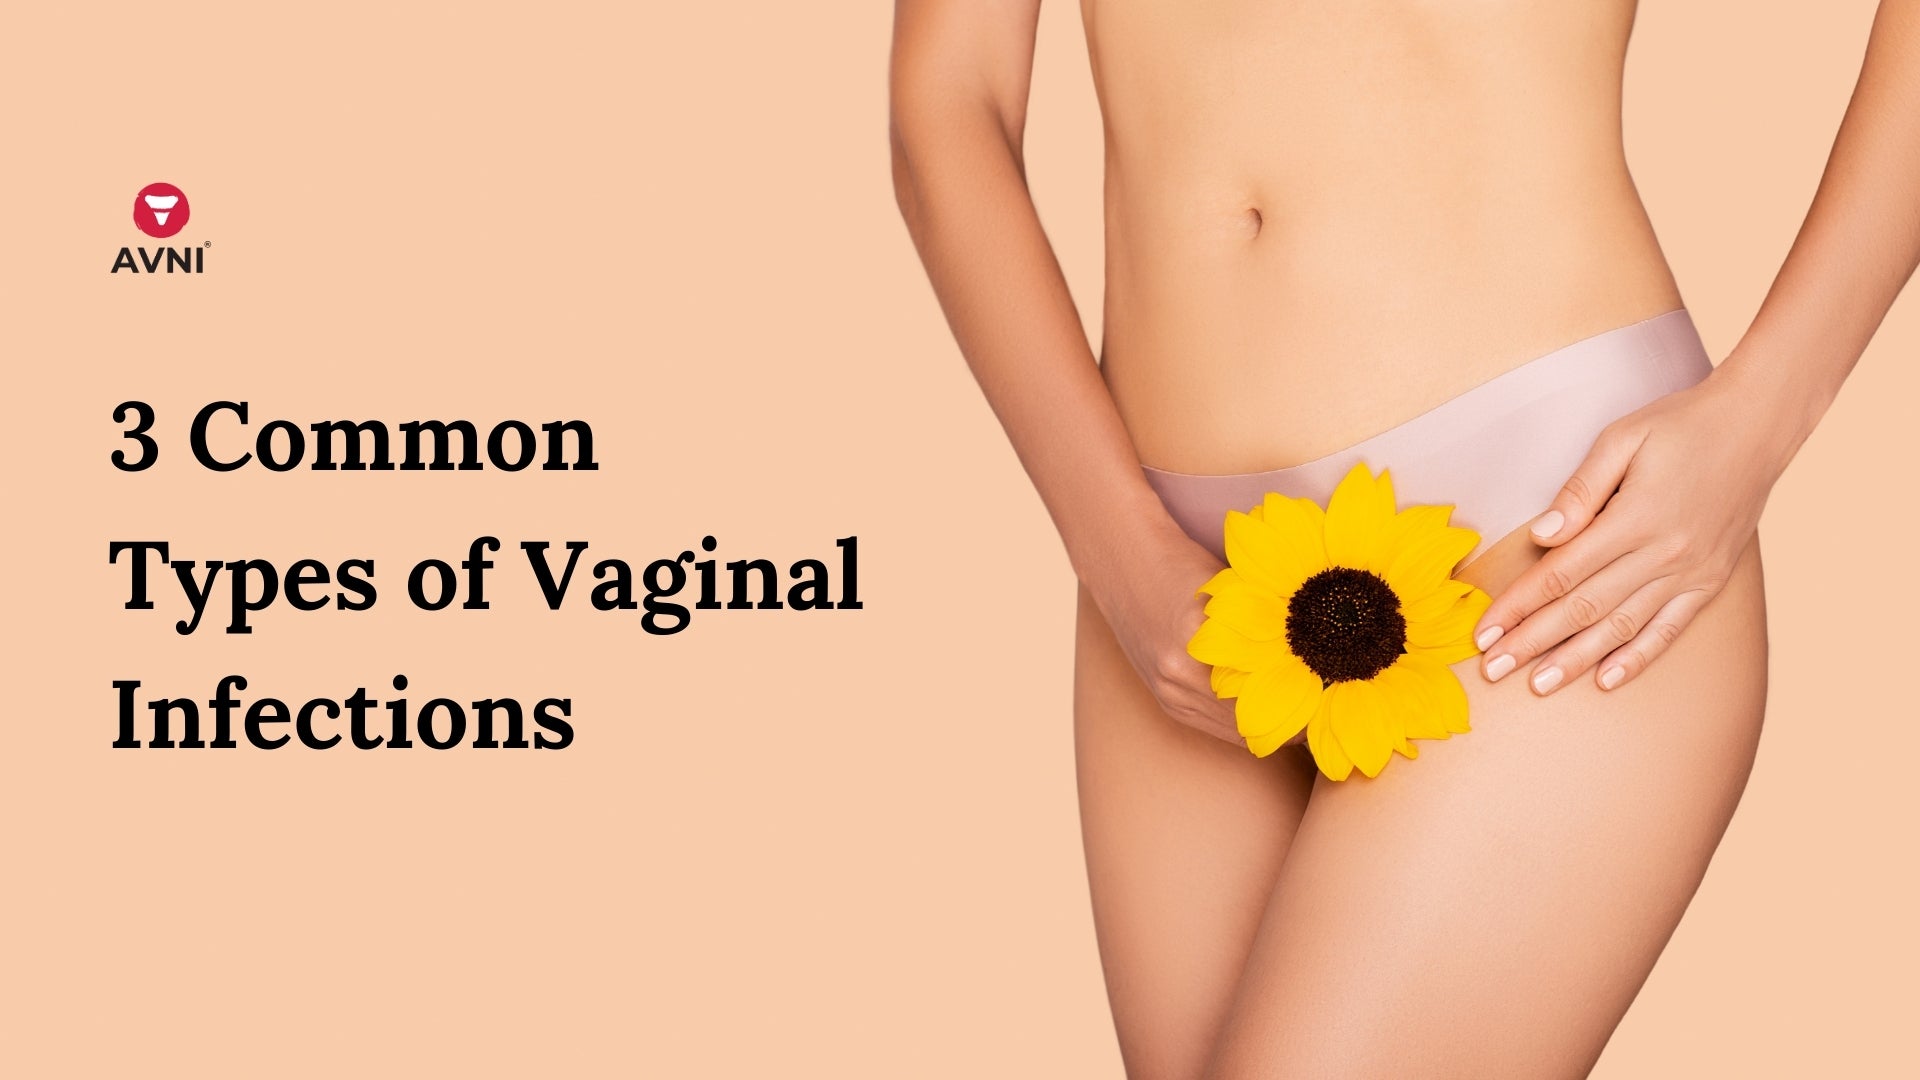 3 Common Types of Vaginal Infections